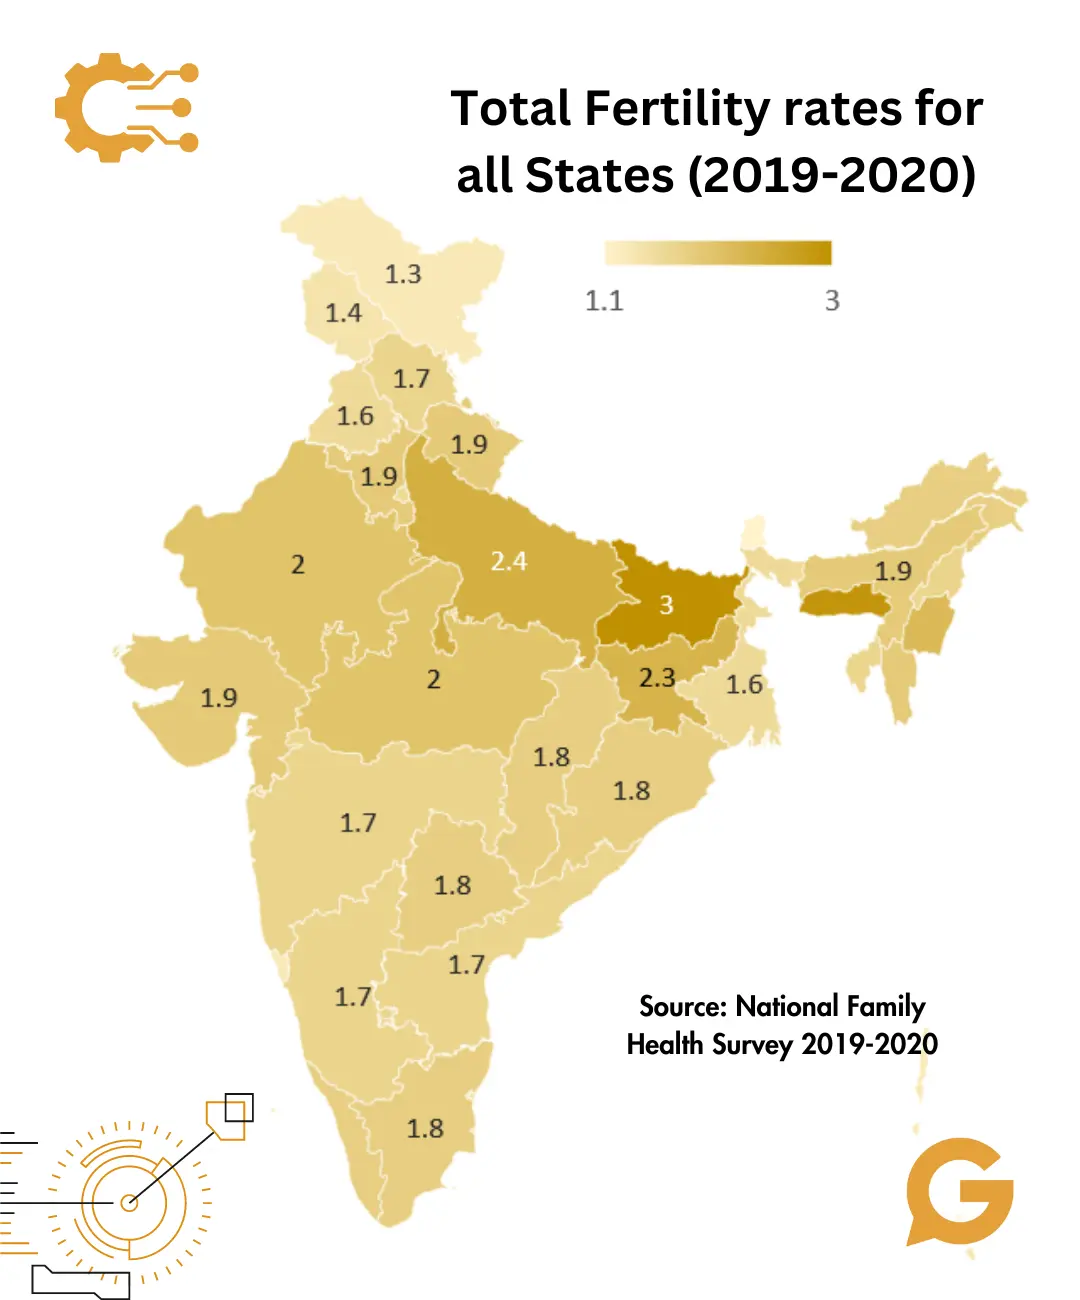 Fertility rate of India